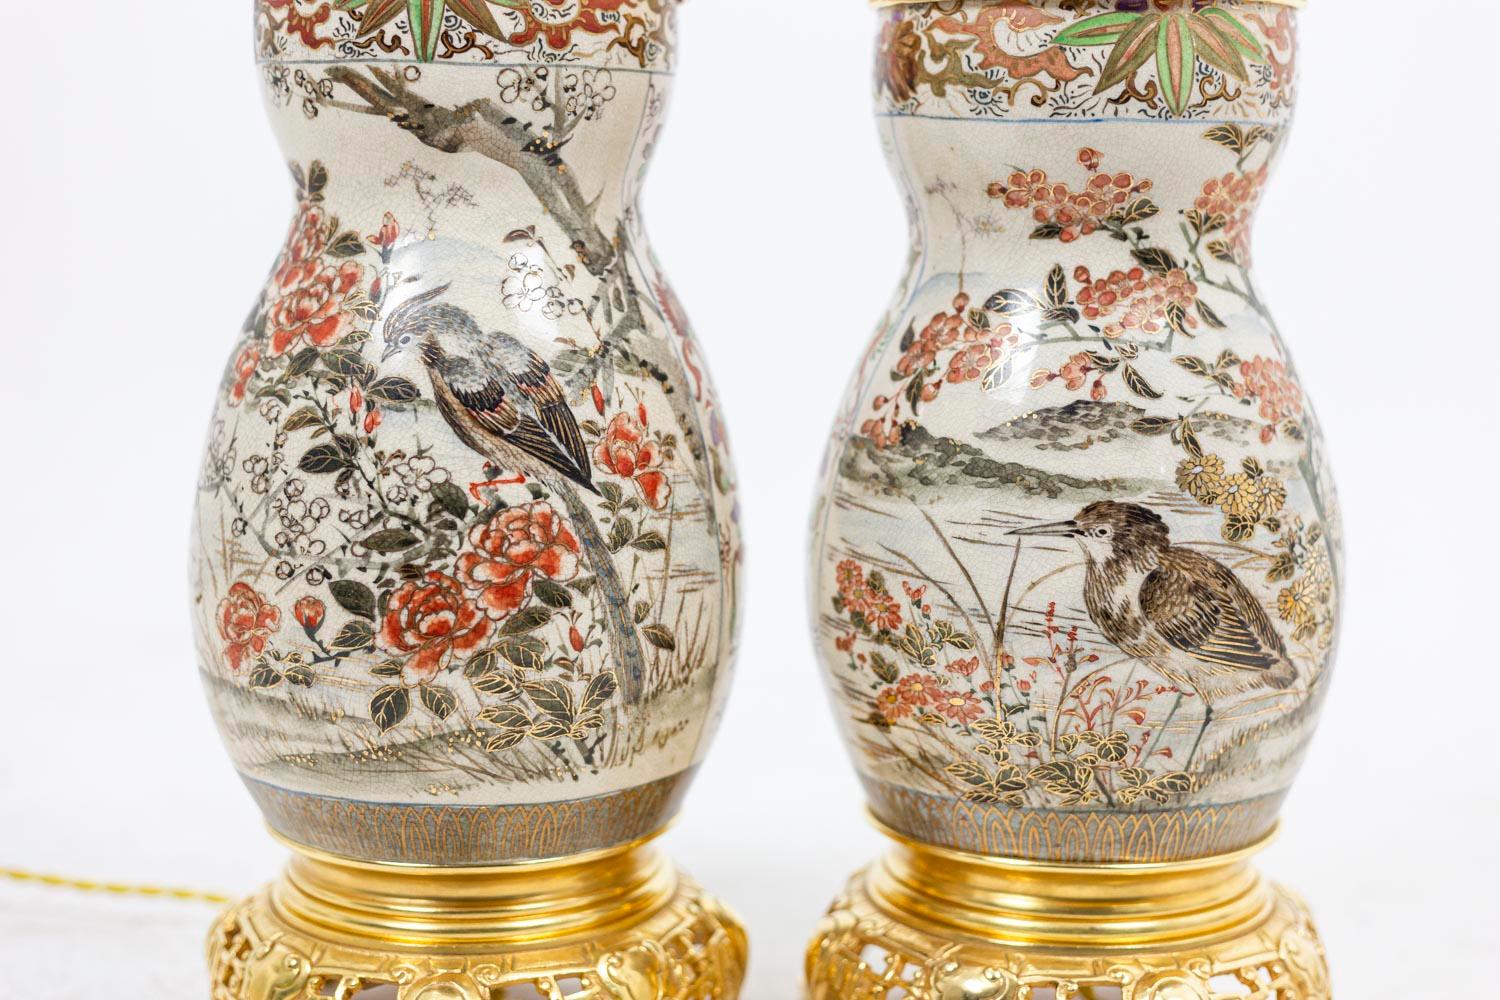 Japonisme Pair of Lamps in Satsuma Earthenware and Bronze, 19th Century